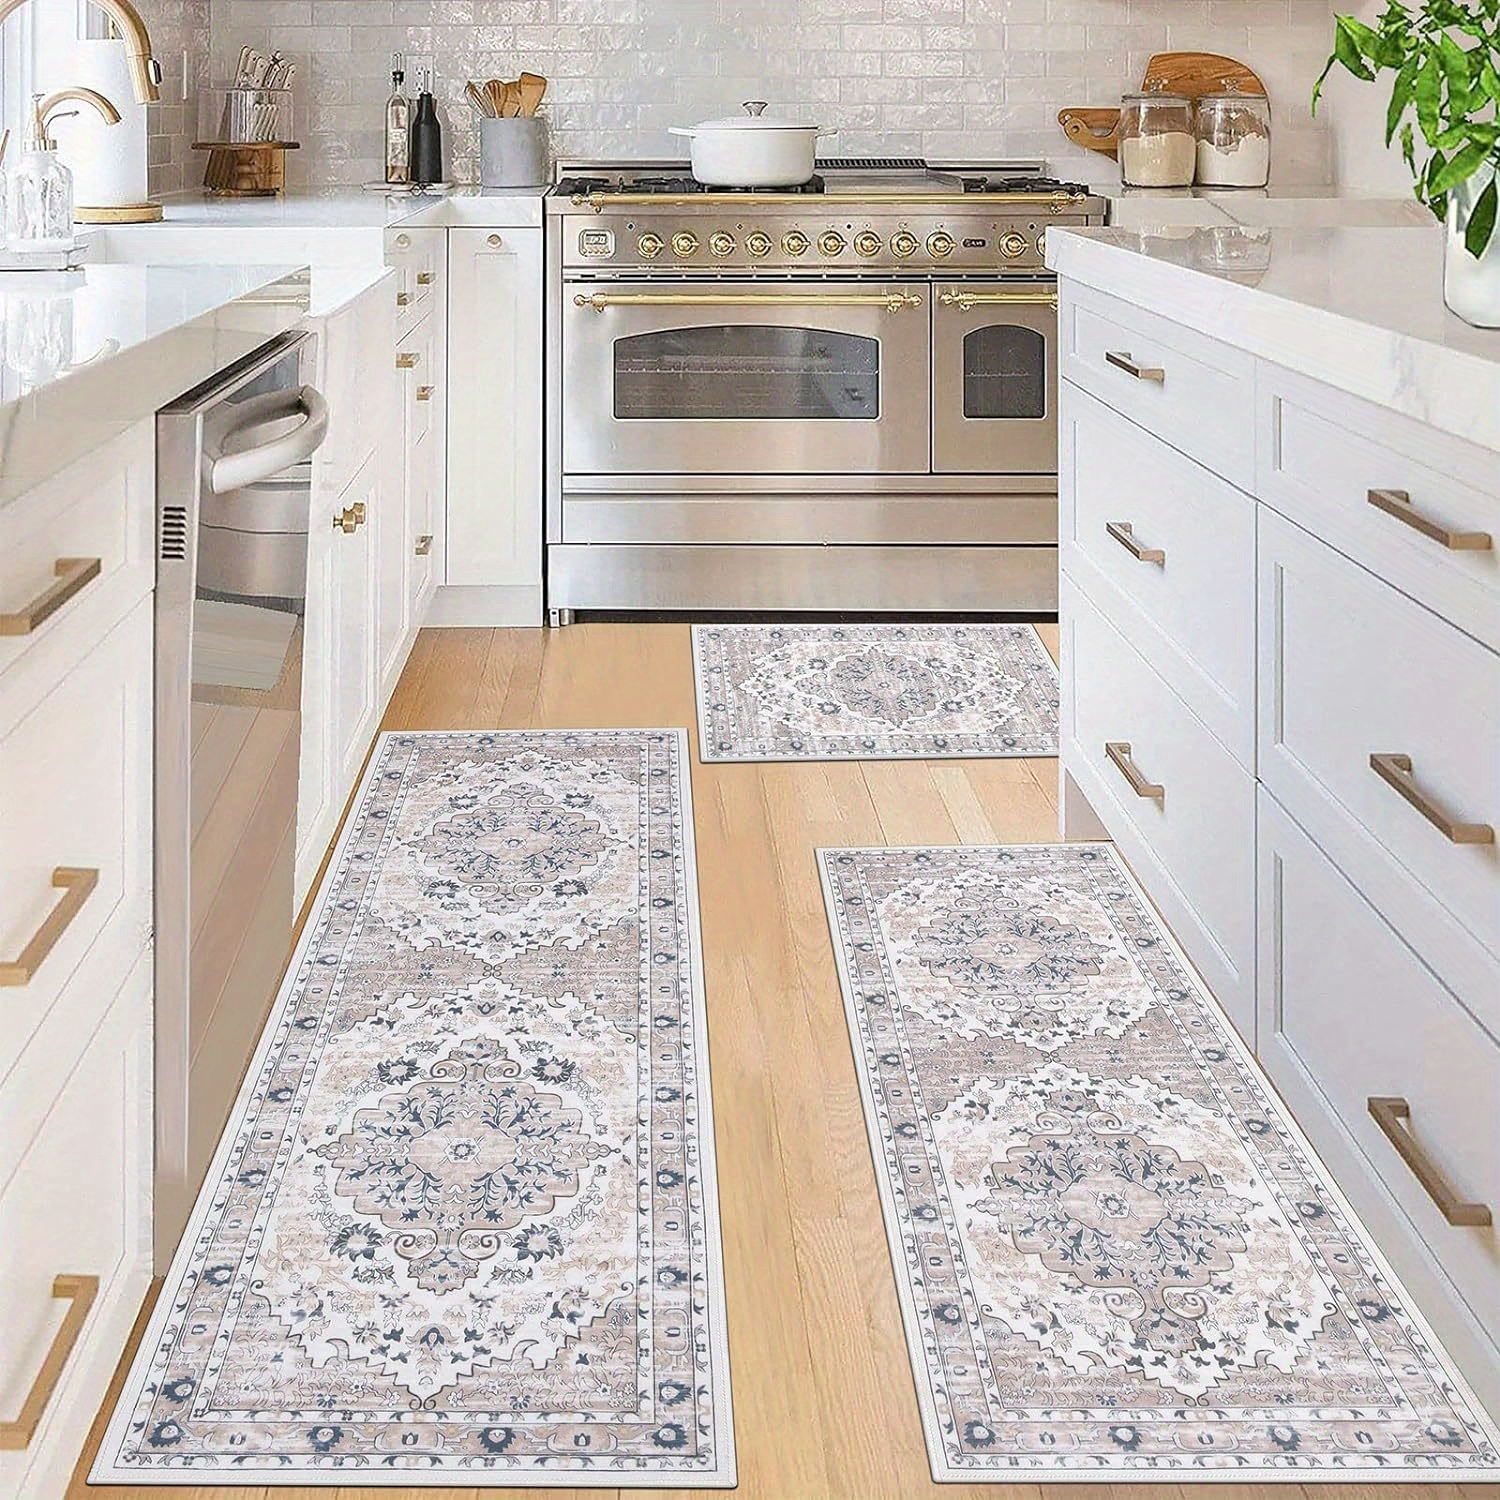 

Boho Kitchen Rug Sets 3 Piece Washable Kitchen Rugs And Mats Non Slip Kitchen Floor Mat Carpets Bohemian Kitchen Runner Rugs For Kitchen Floor Hallway Living Room Laundry Entryway